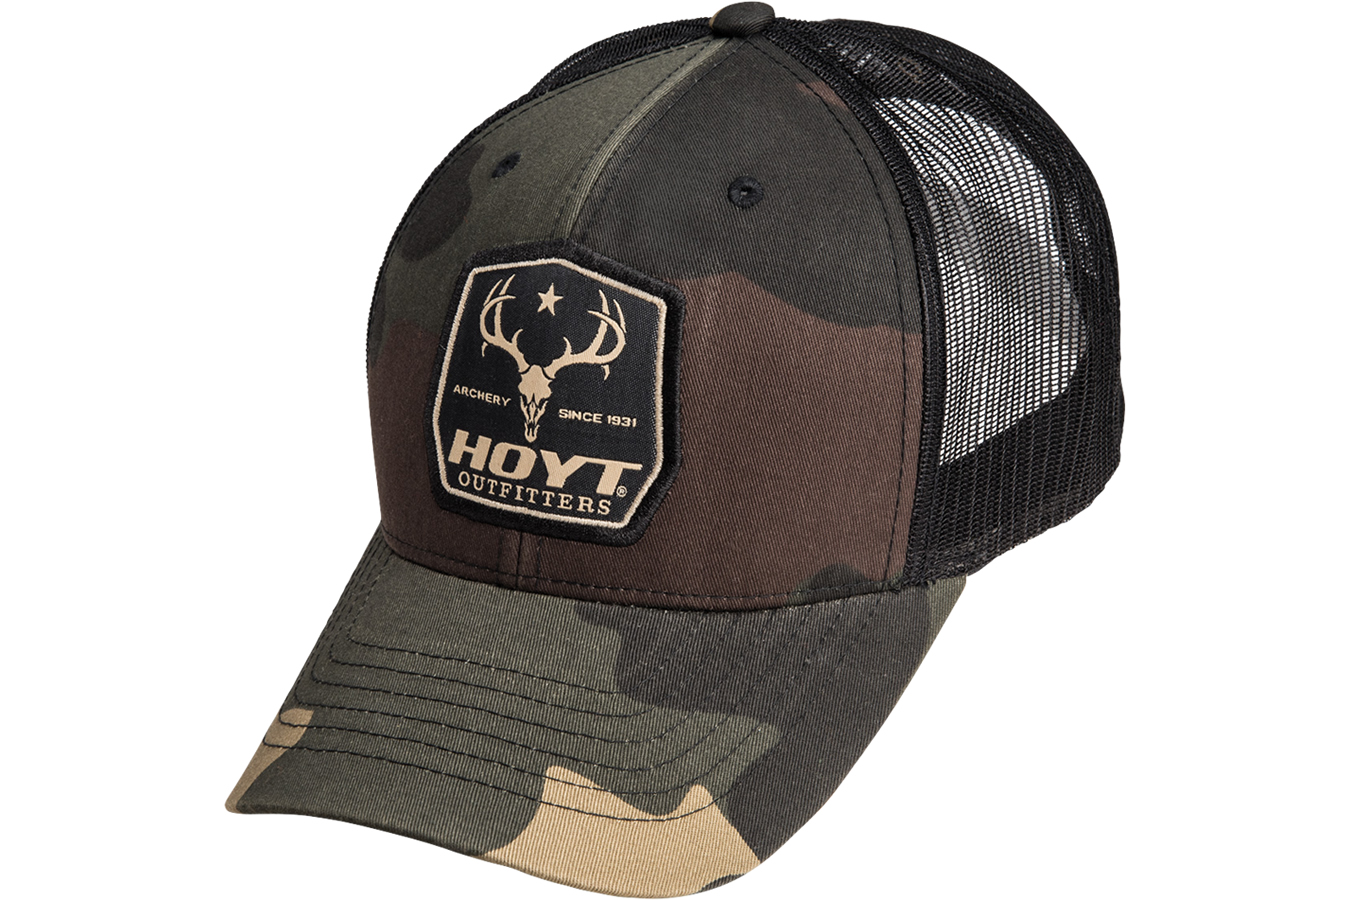 Hoyt Woodland Hoyt Outfitters Hat | Vance Outdoors